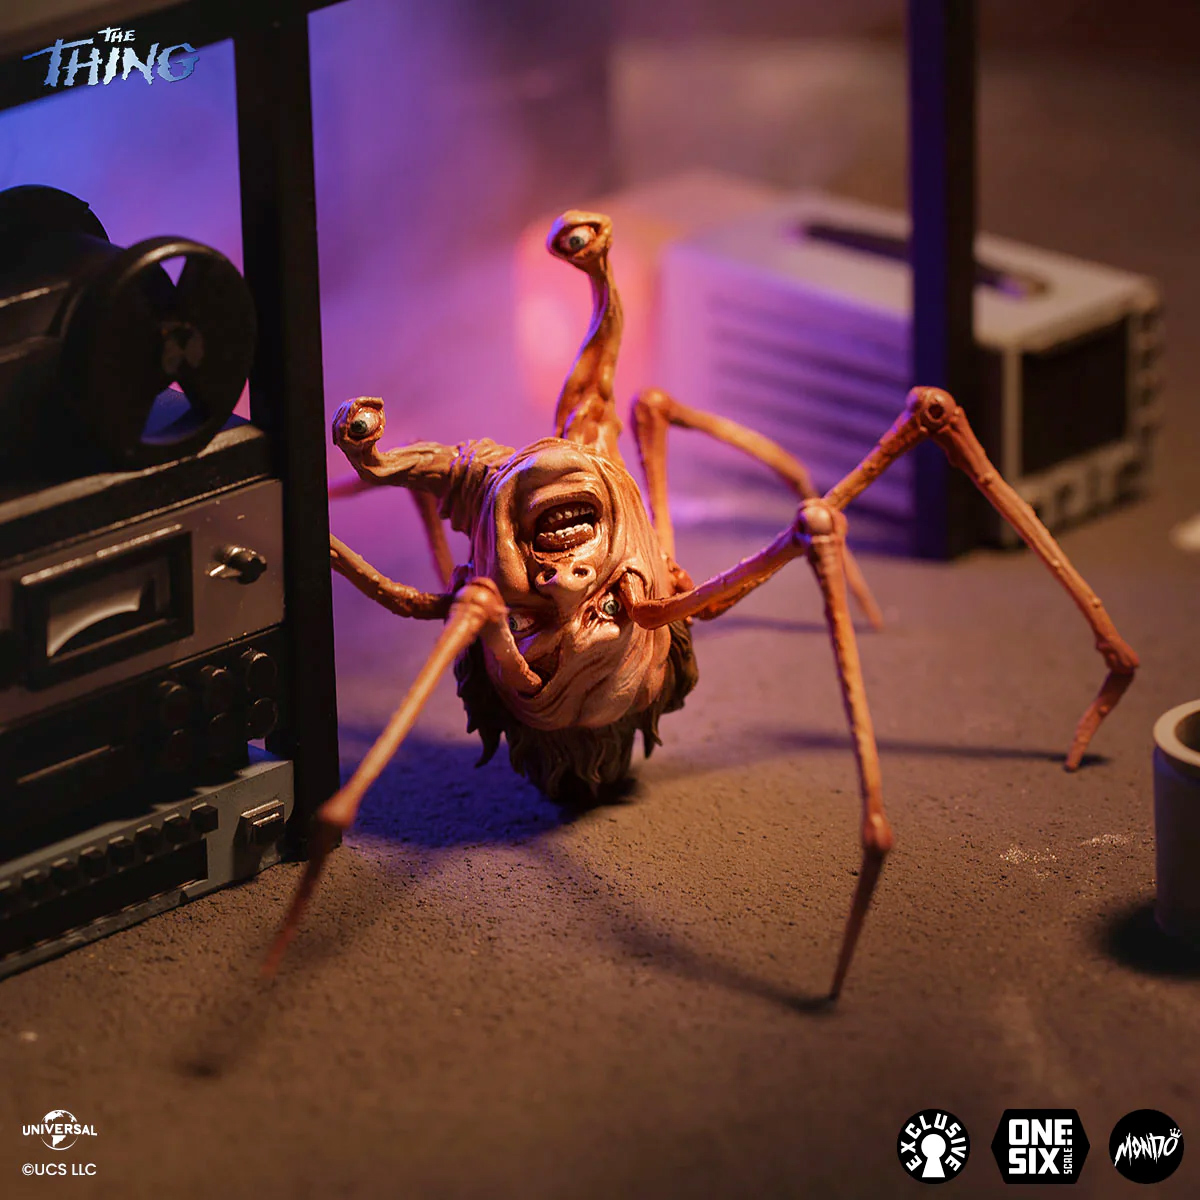 Action Figure Mondo 1:6 from The Thing by John Carpenter